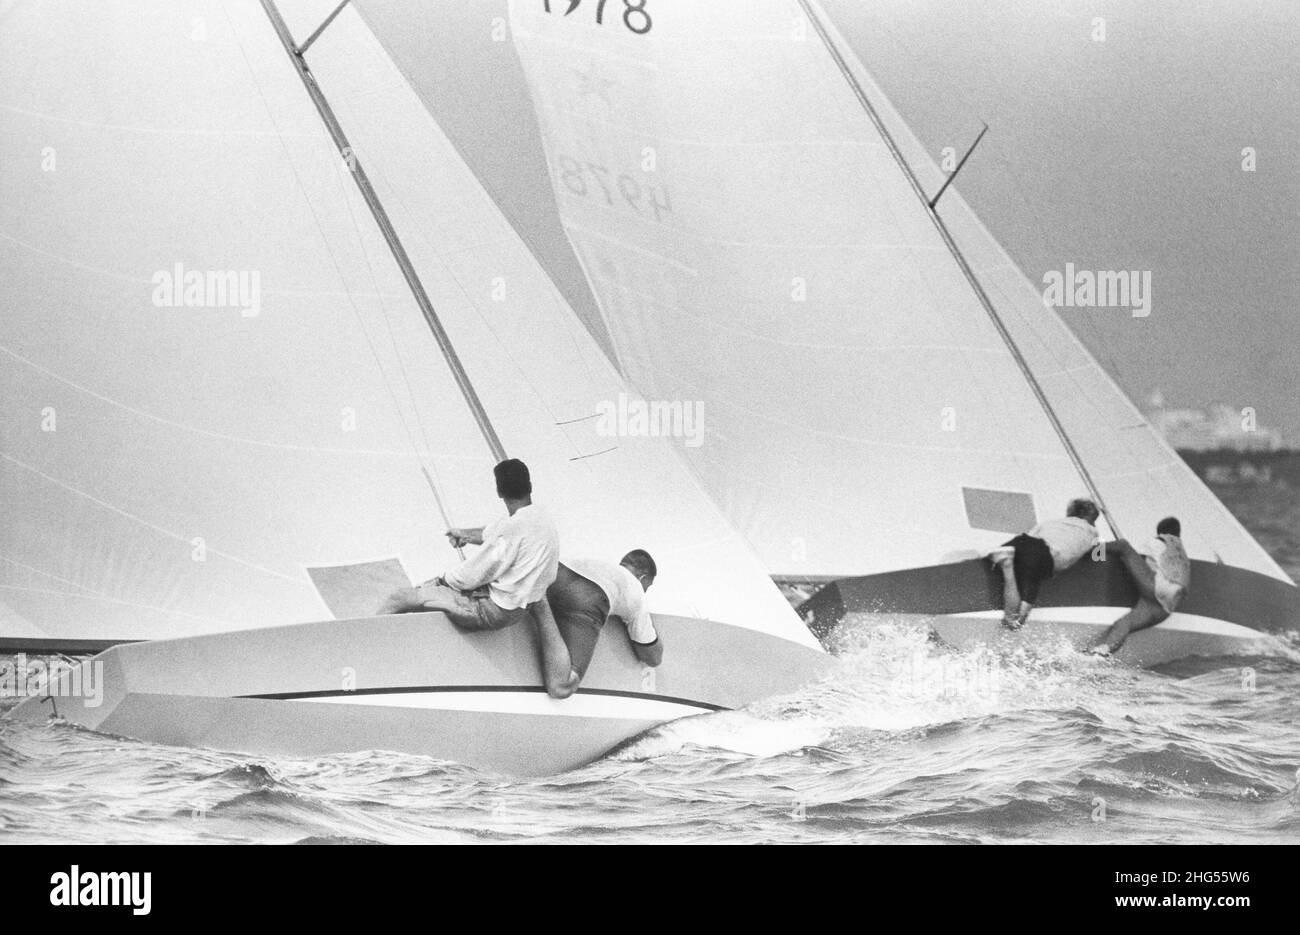 Star Class Sailboat racing on Biscayne Bay, Miami, Florida.  Ca. late 1960's. Stock Photo